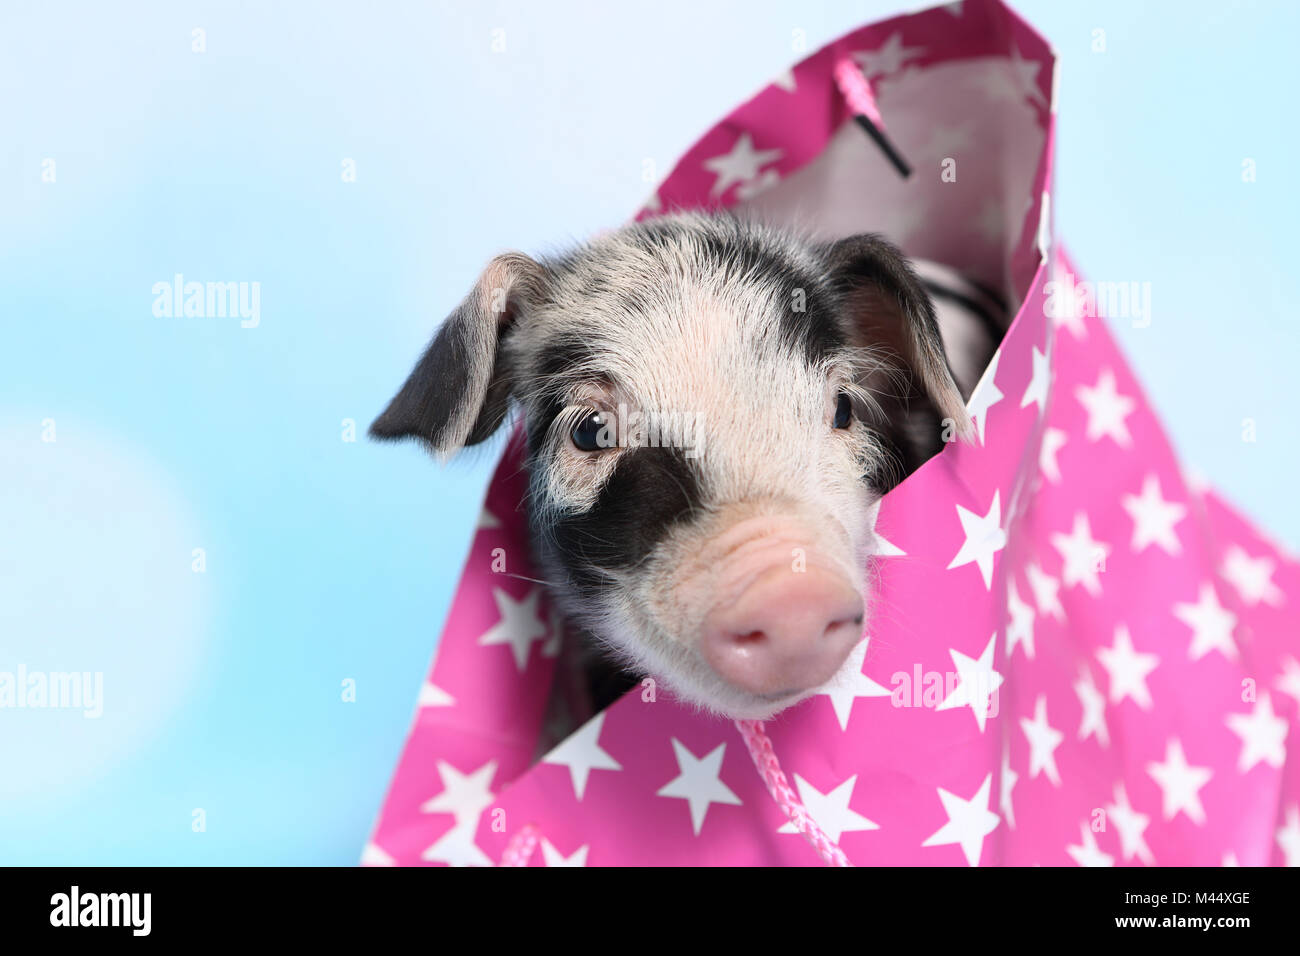 Domestic Pig, Turopolje x ?. Piglet (1 week old) in a pink carrier with star print. Studio picture against a light blue background. Germany Stock Photo